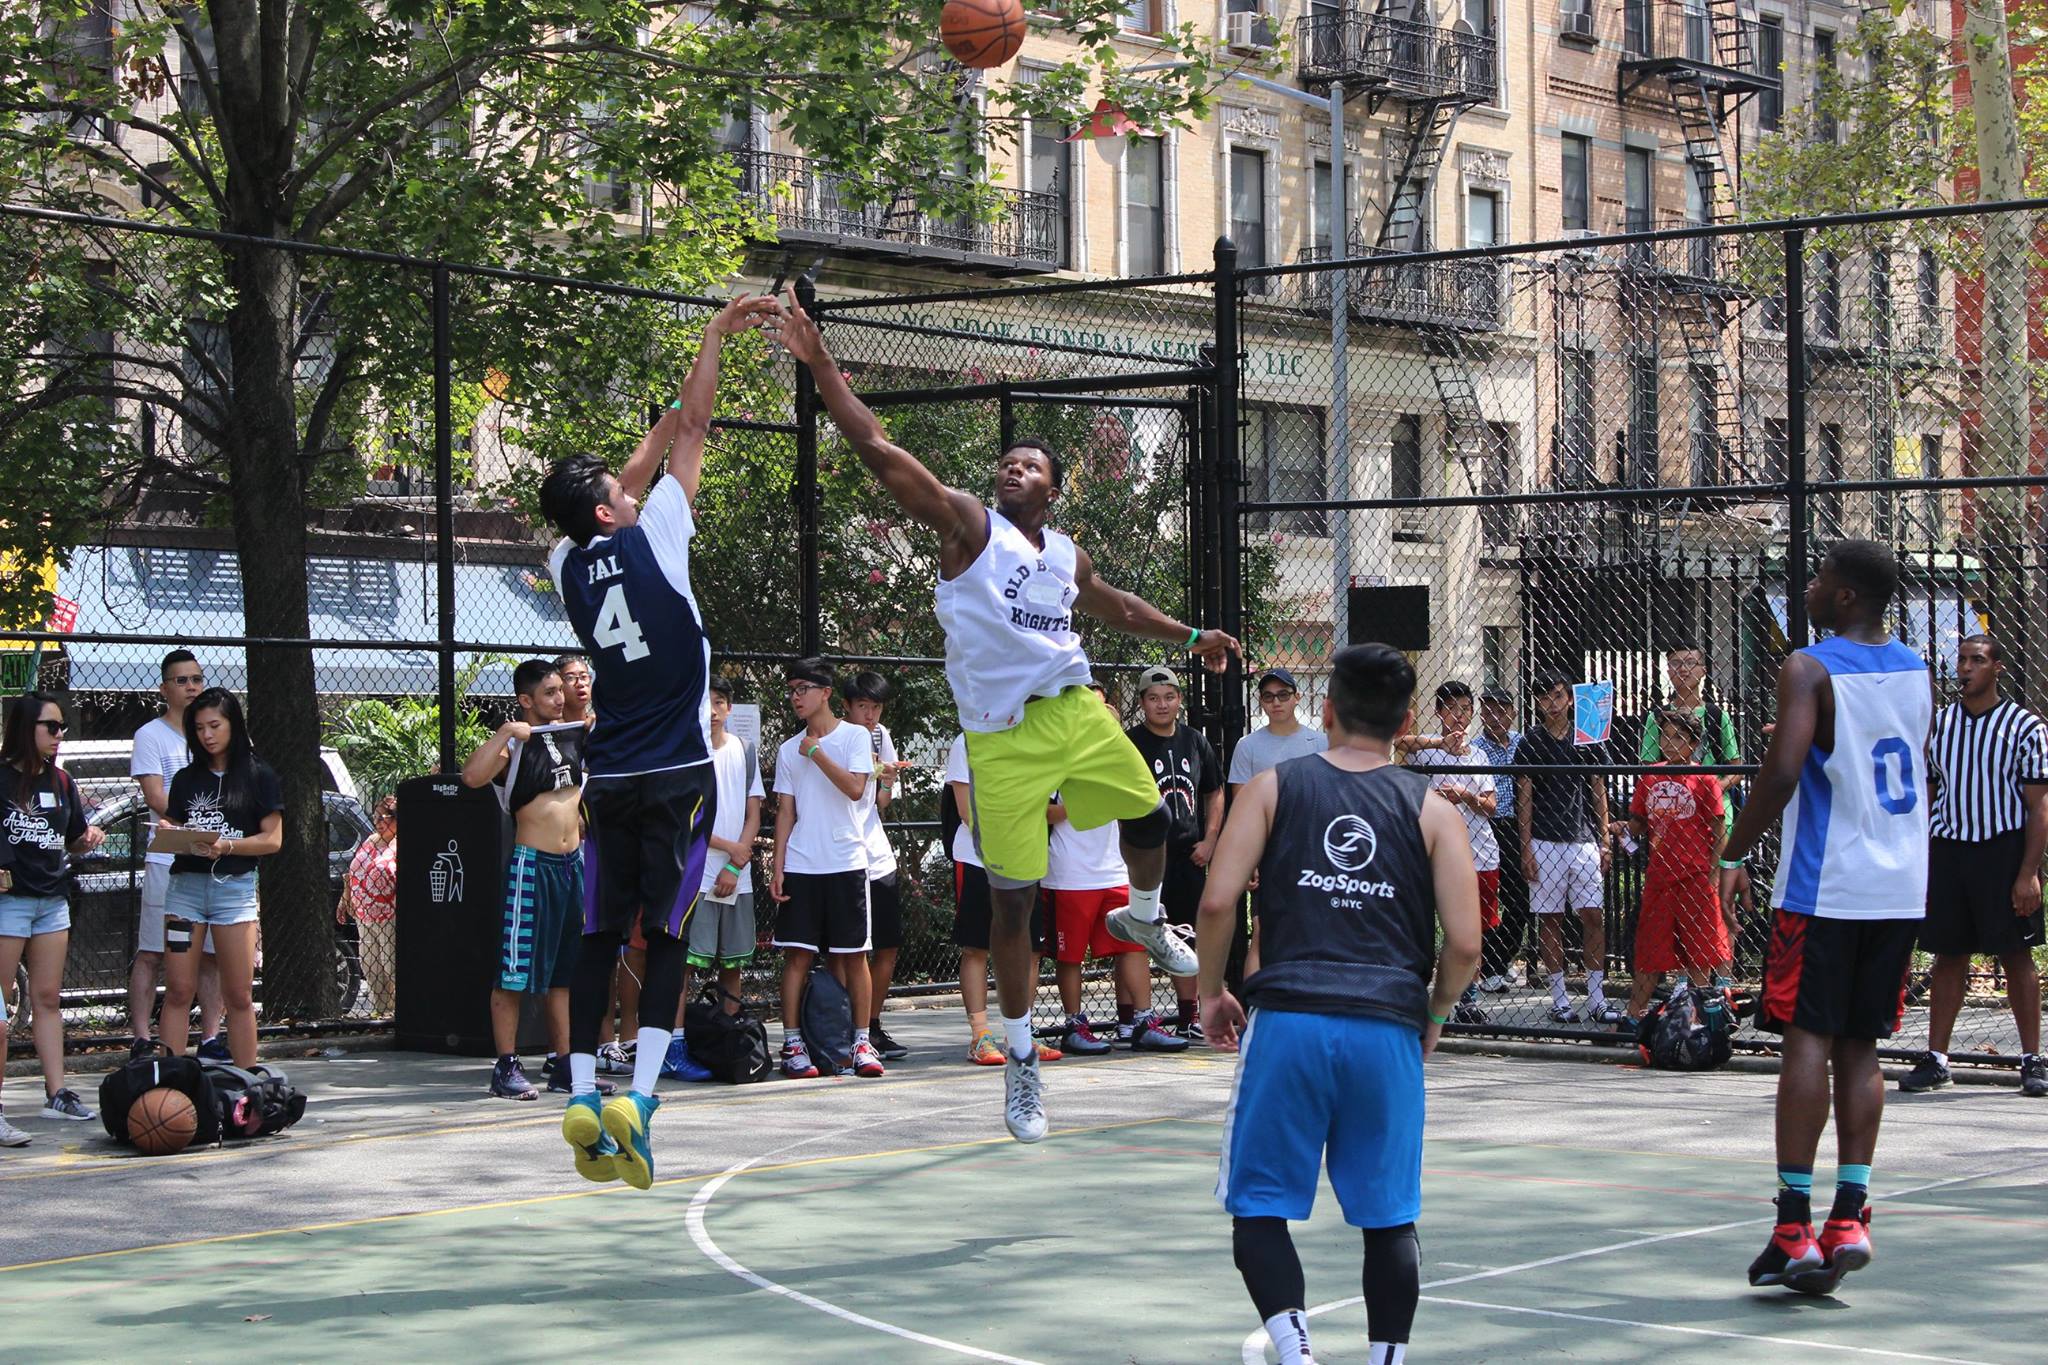 CPC's 3rd Annual Basketball Tournament at Columbus Park